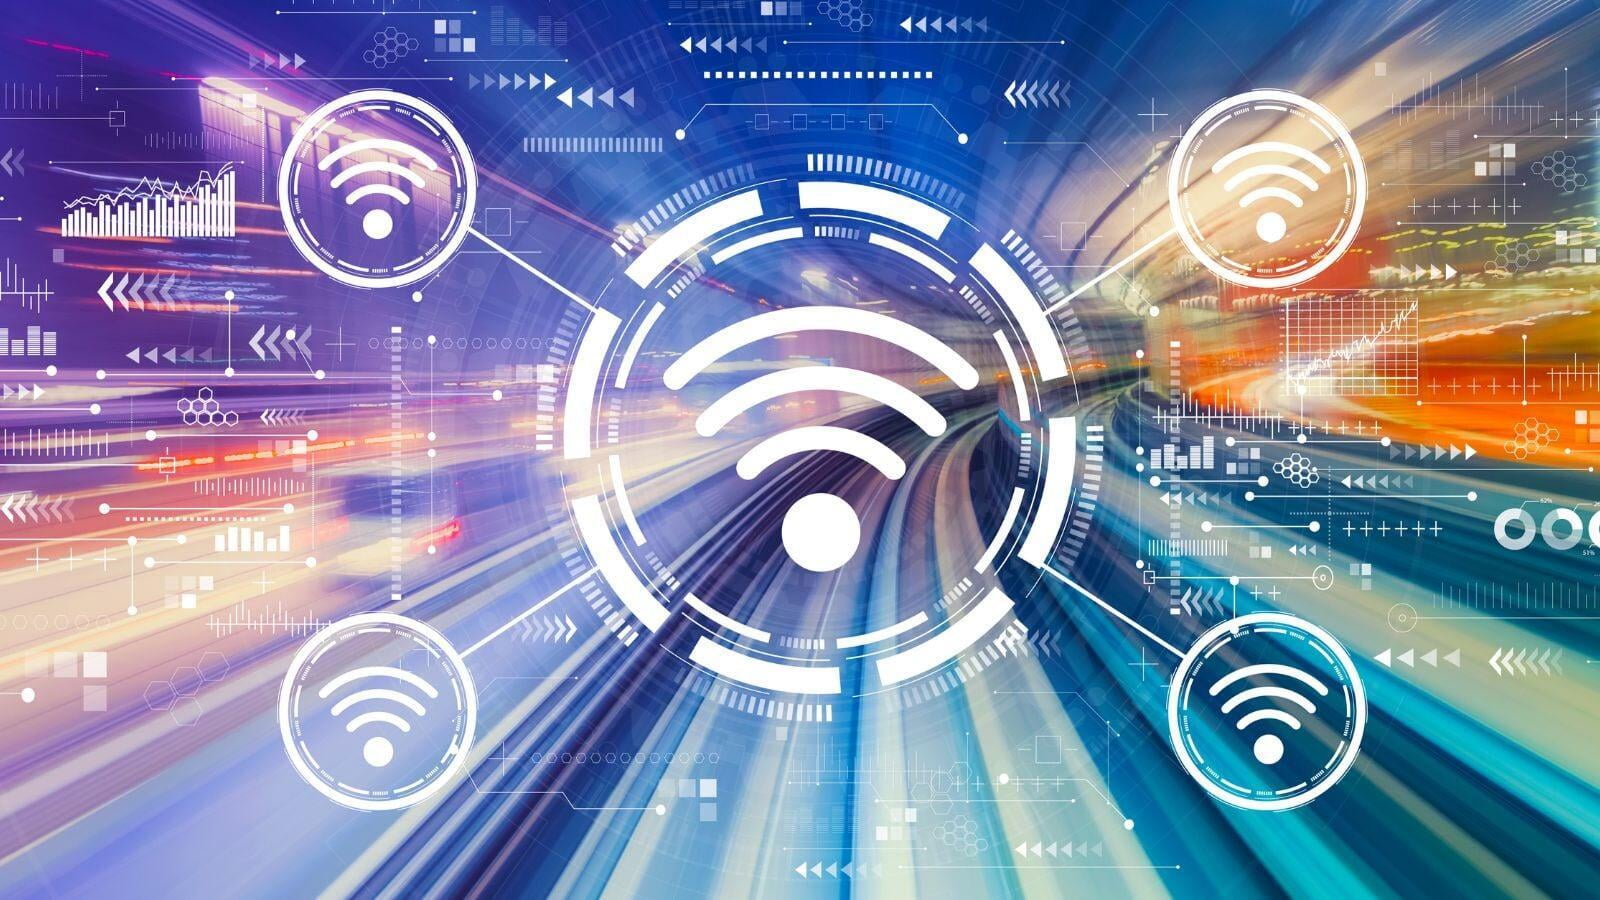  Elevate Your Business Connectivity Expert Wi-Fi Assessment and Optimization Solutions by Annexus Technologies